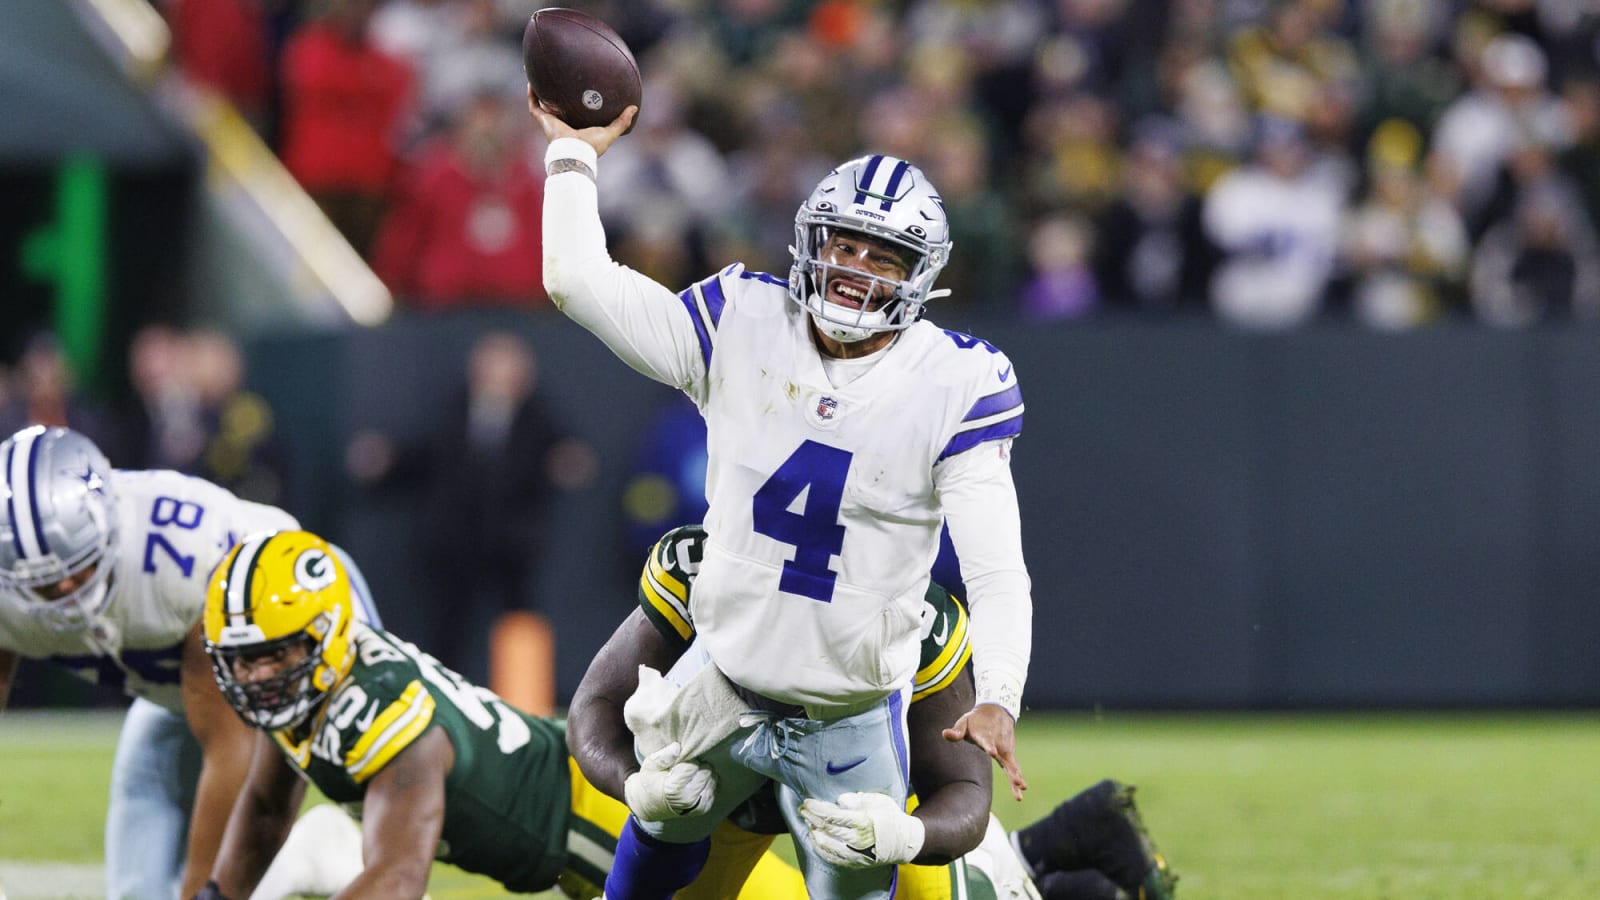 Y’all outta pocket!: Dak Prescott is not the ‘weakest link’ of the Dallas Cowboys